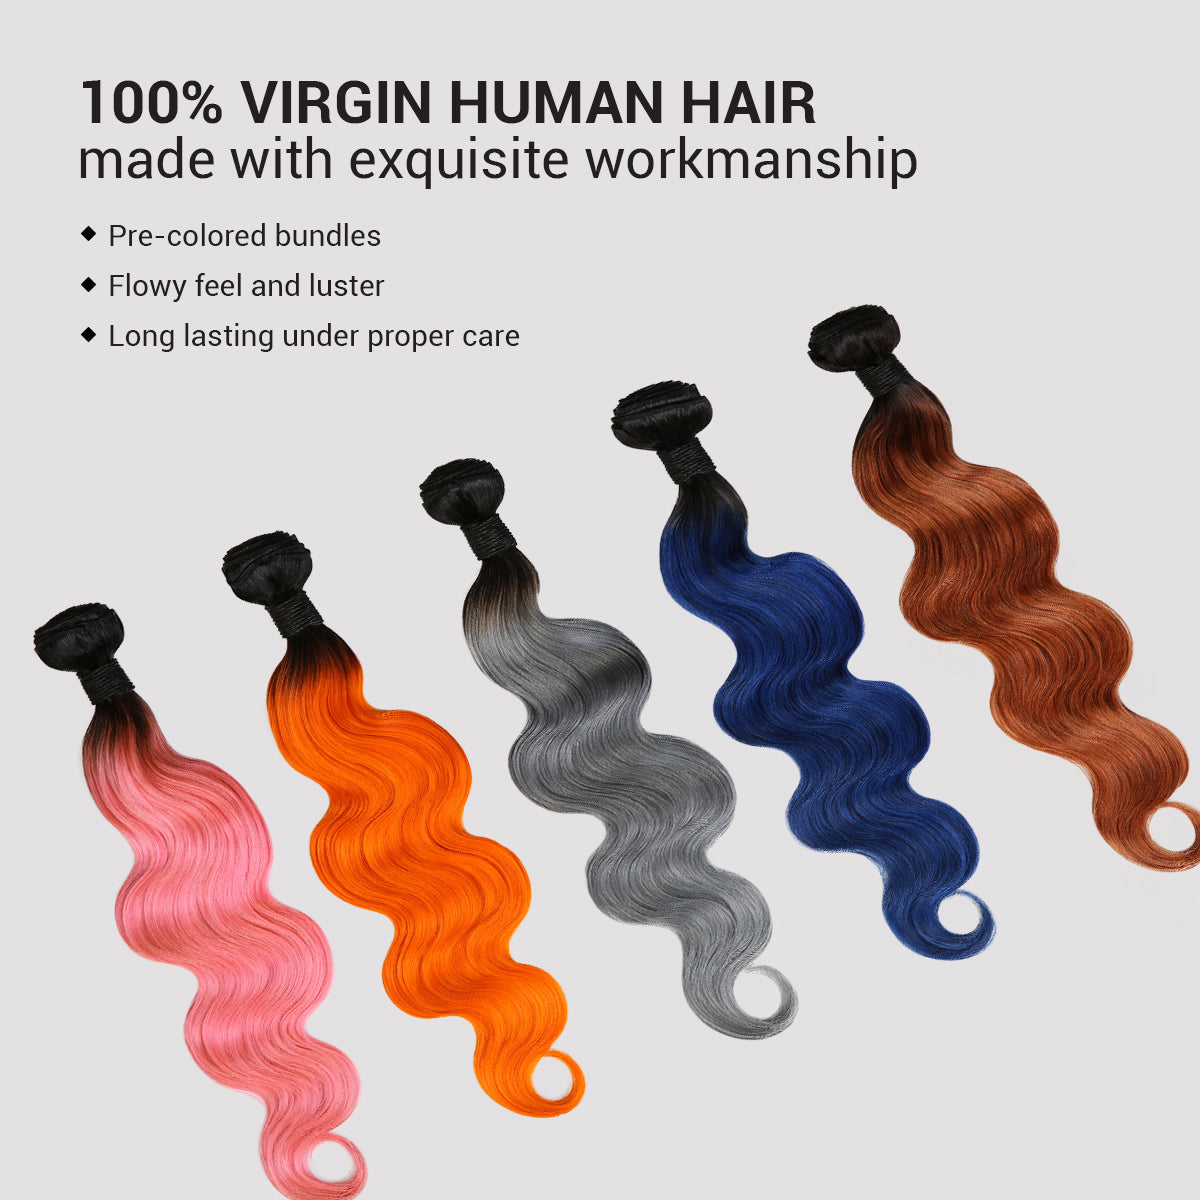 Uniq Hair 100% Virgin Human Hair Brazilian Bundle Hair Weave 9A Body #OTPINK 3Pcs Find Your New Look Today!